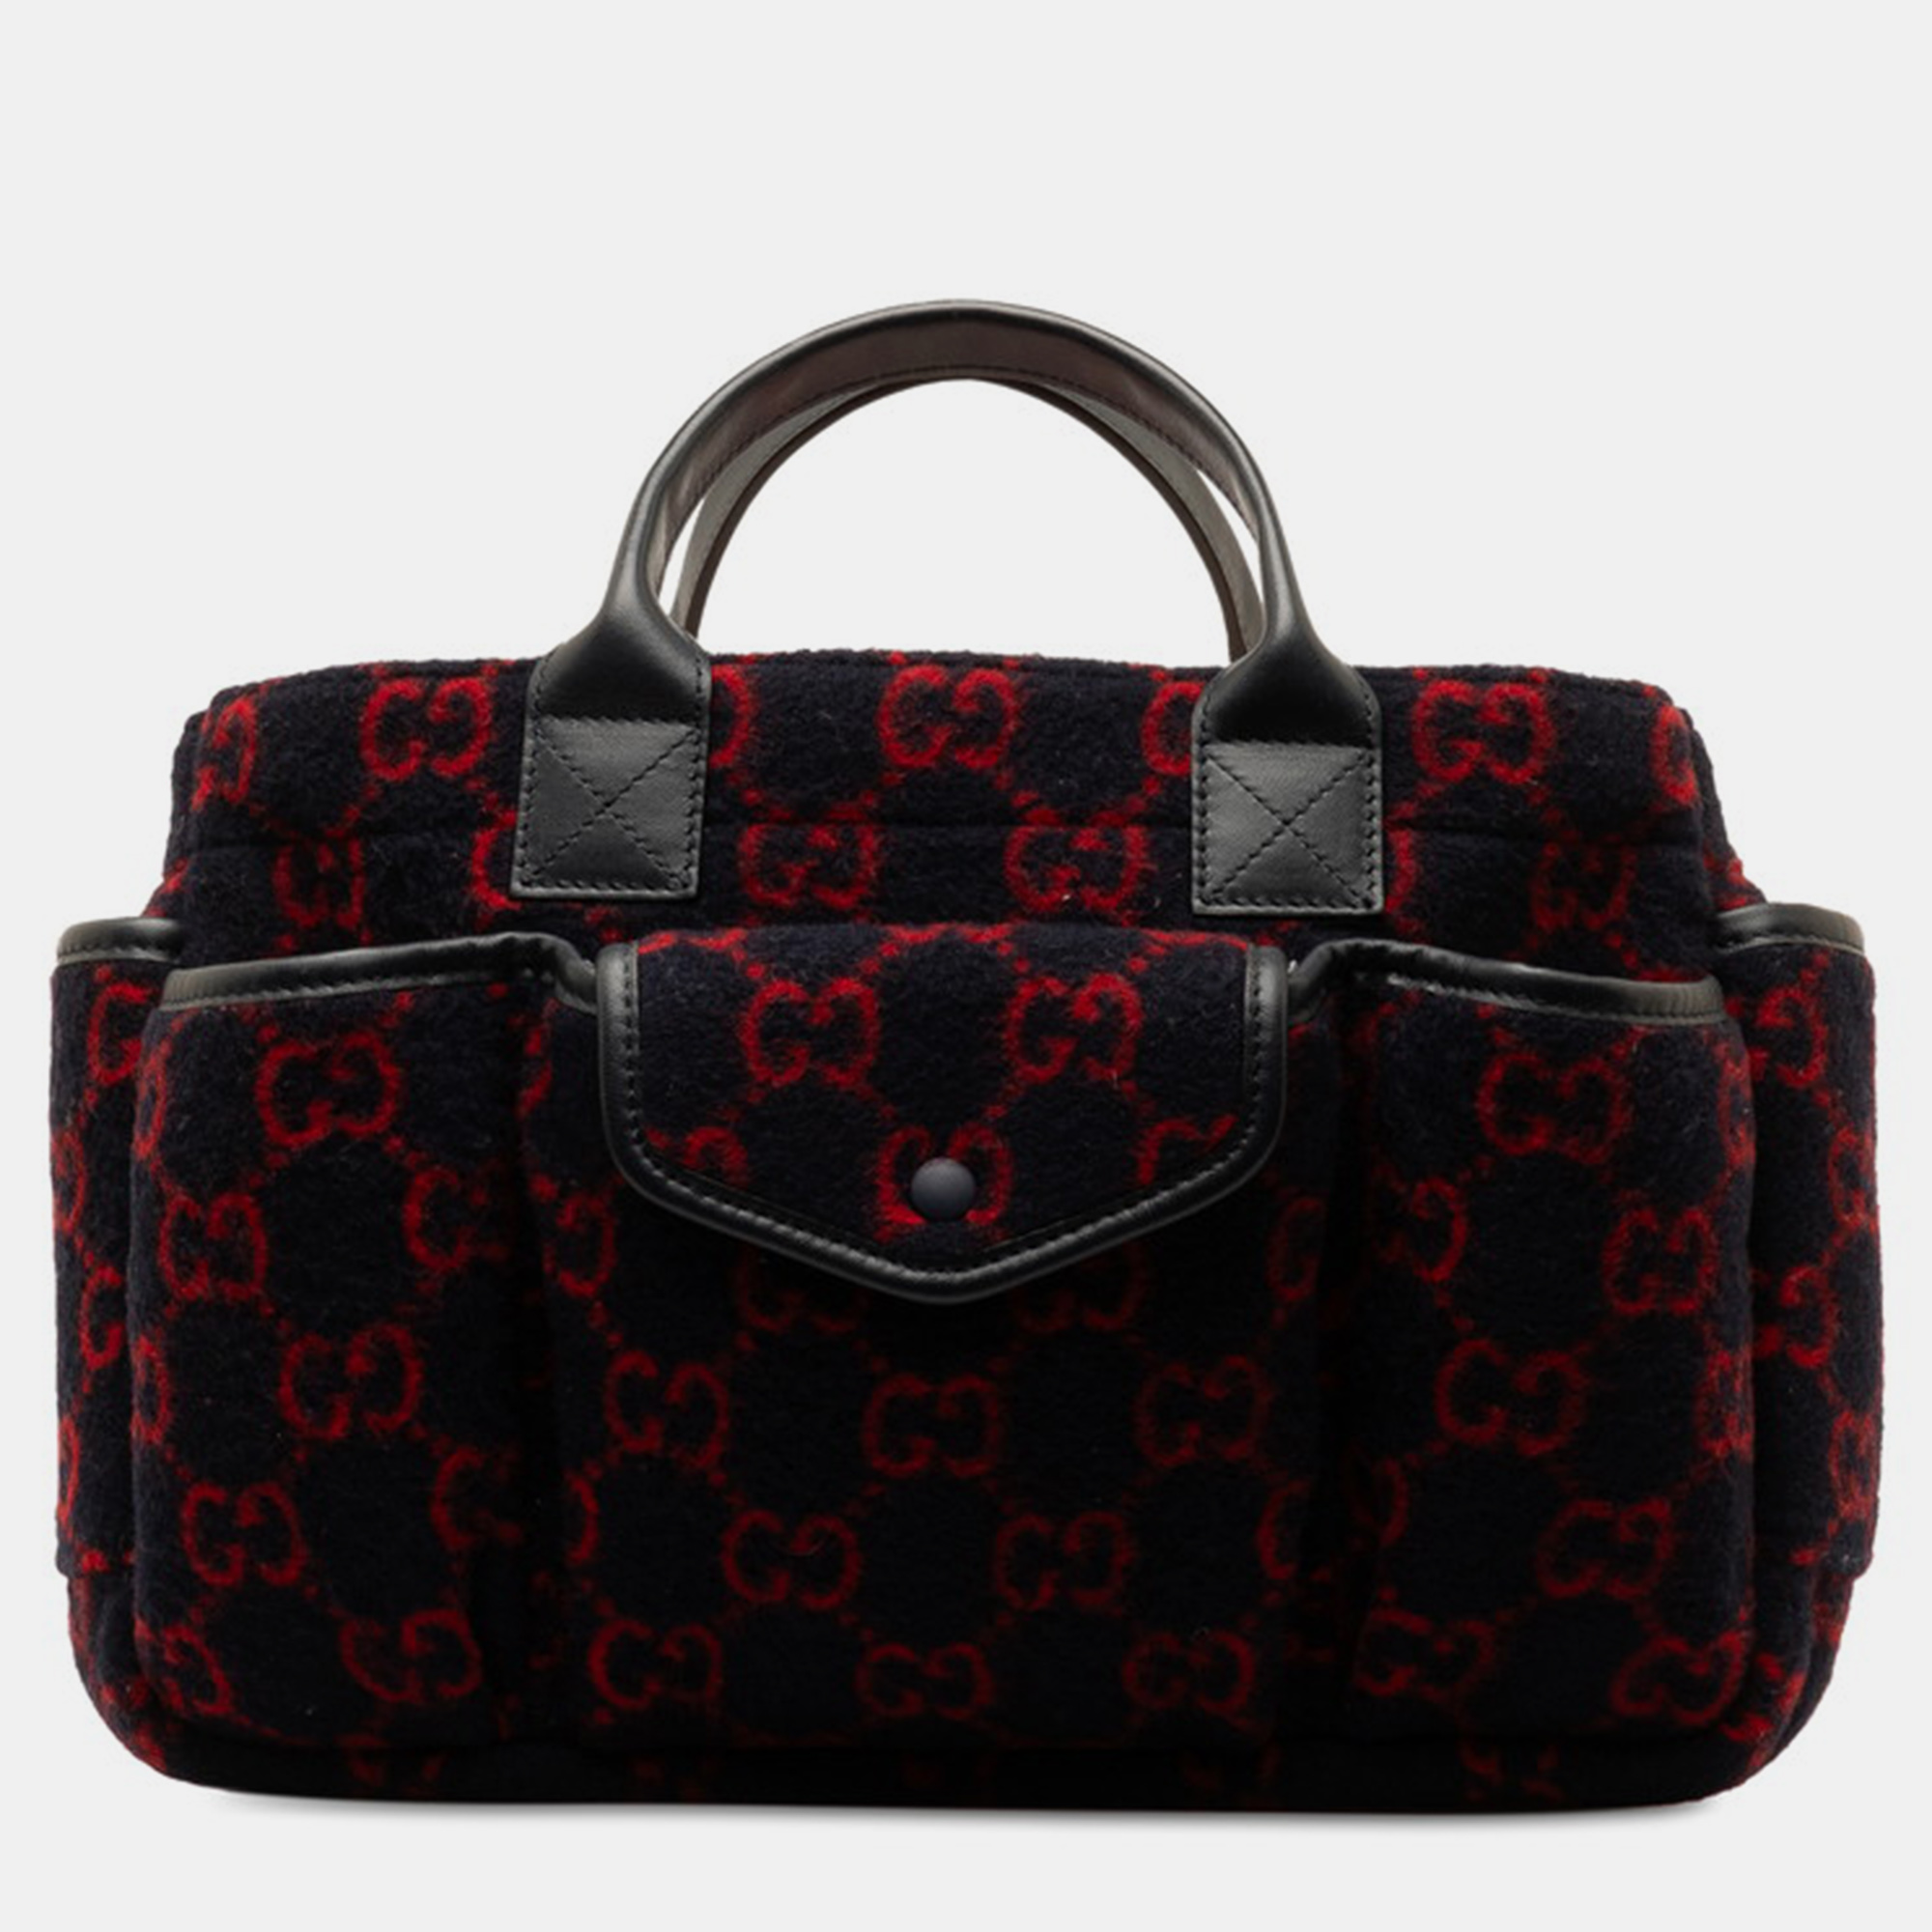 Pre-owned Gucci Black/red Wool Gg Top Handle Bag